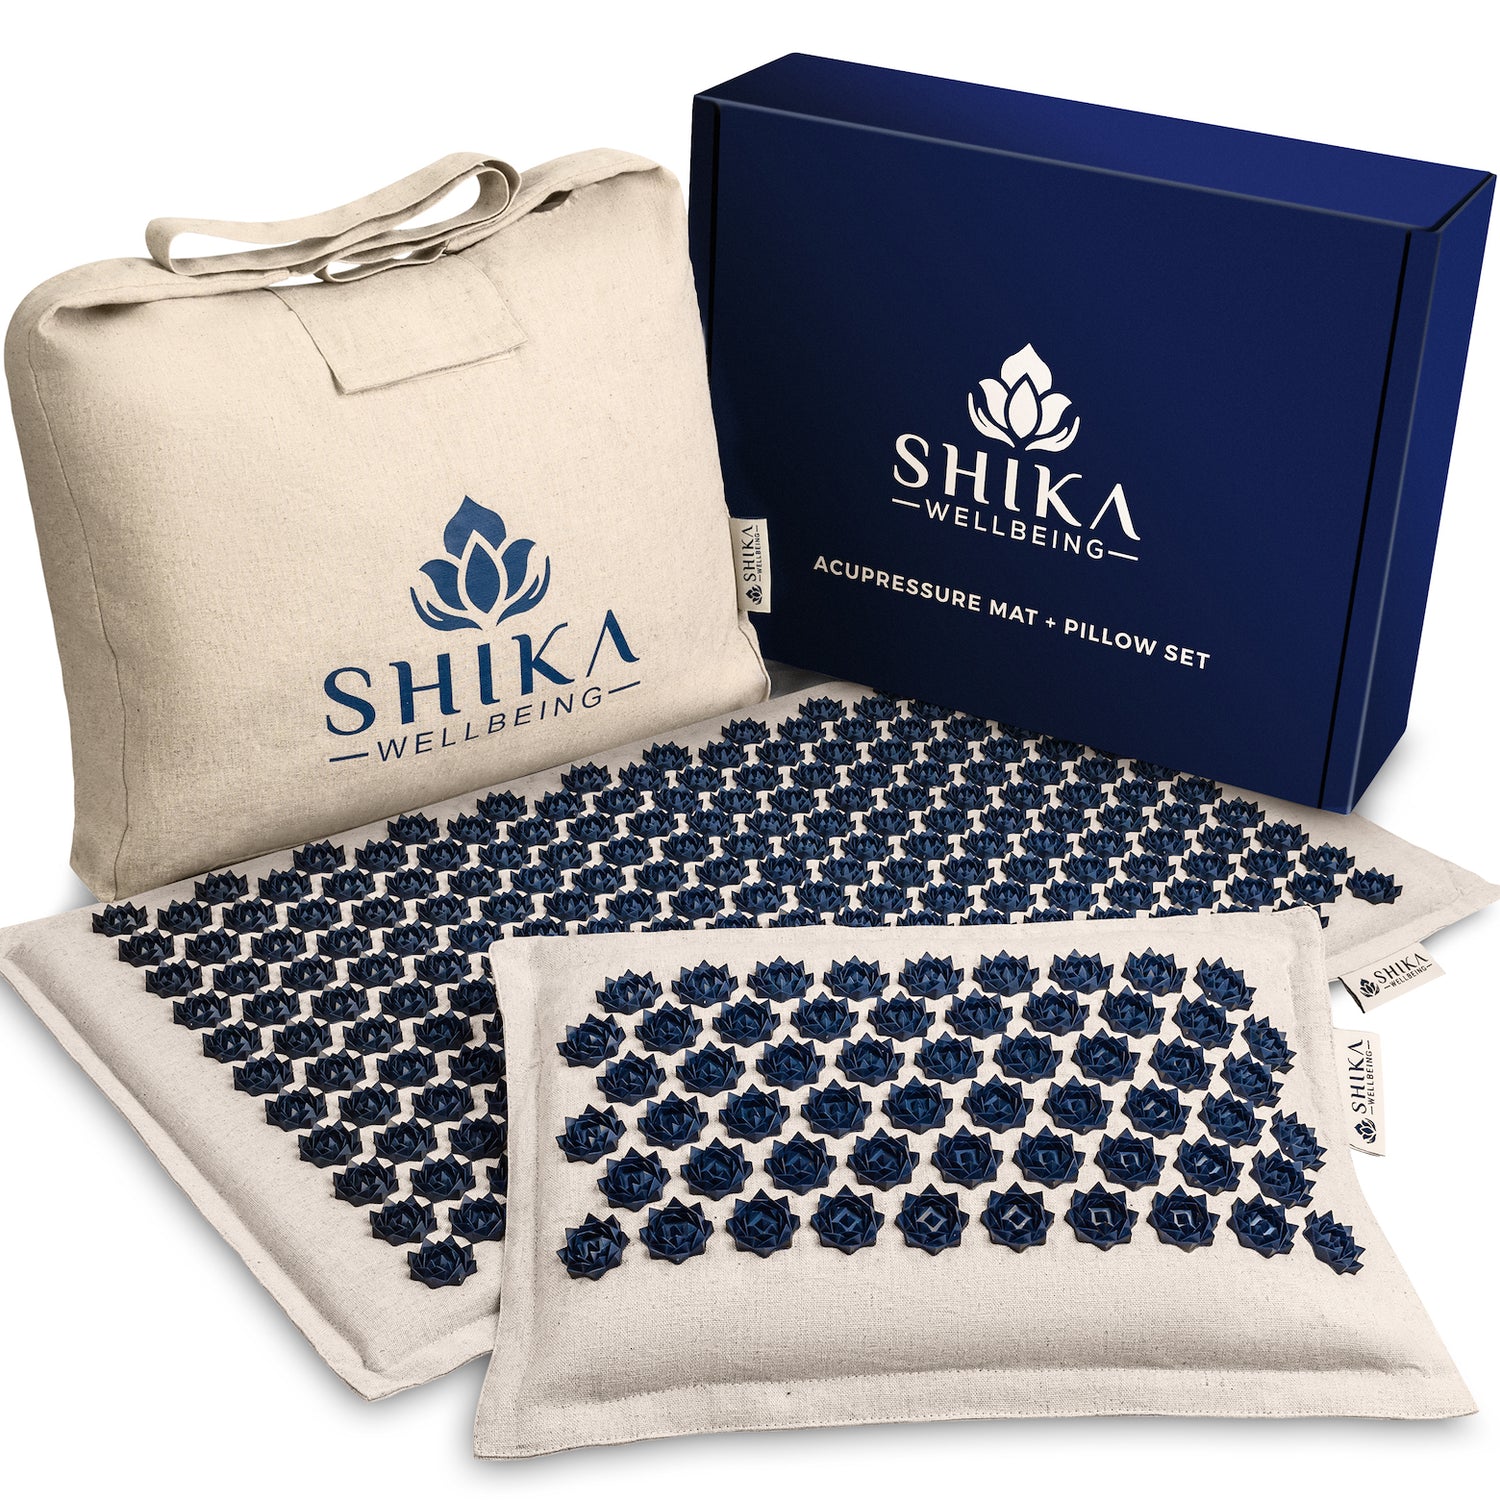 An image of the Acupressure mat and pillow set with a blue gift box